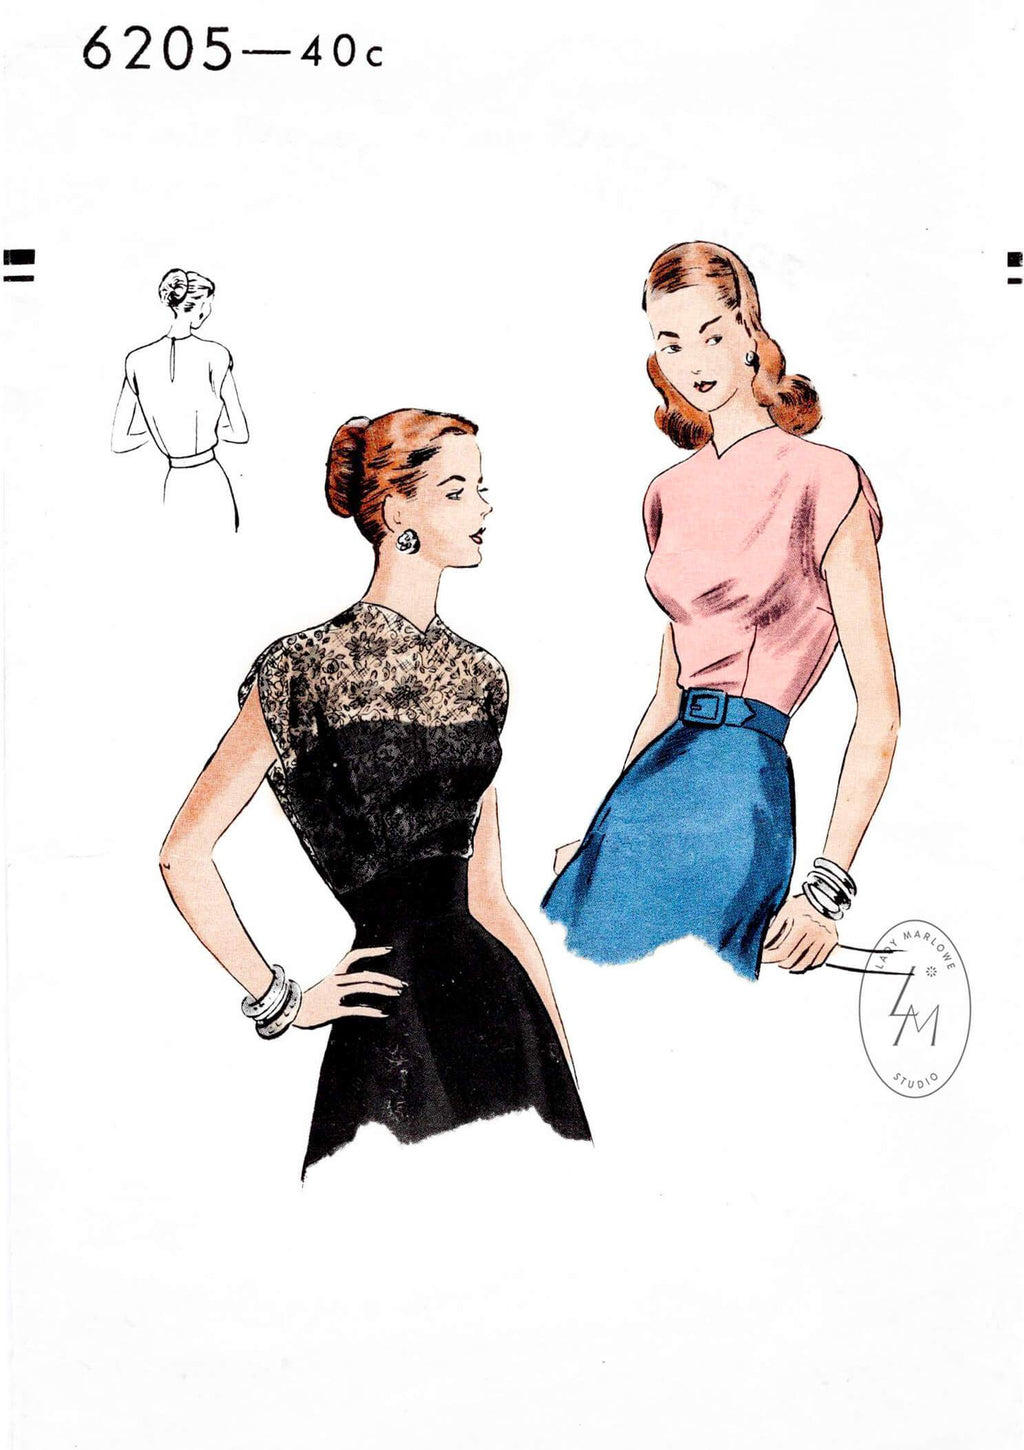 Vogue 6205 vintage sewing pattern 1940s Blouse cap sleeves fitted bodice, easy to make reproduction